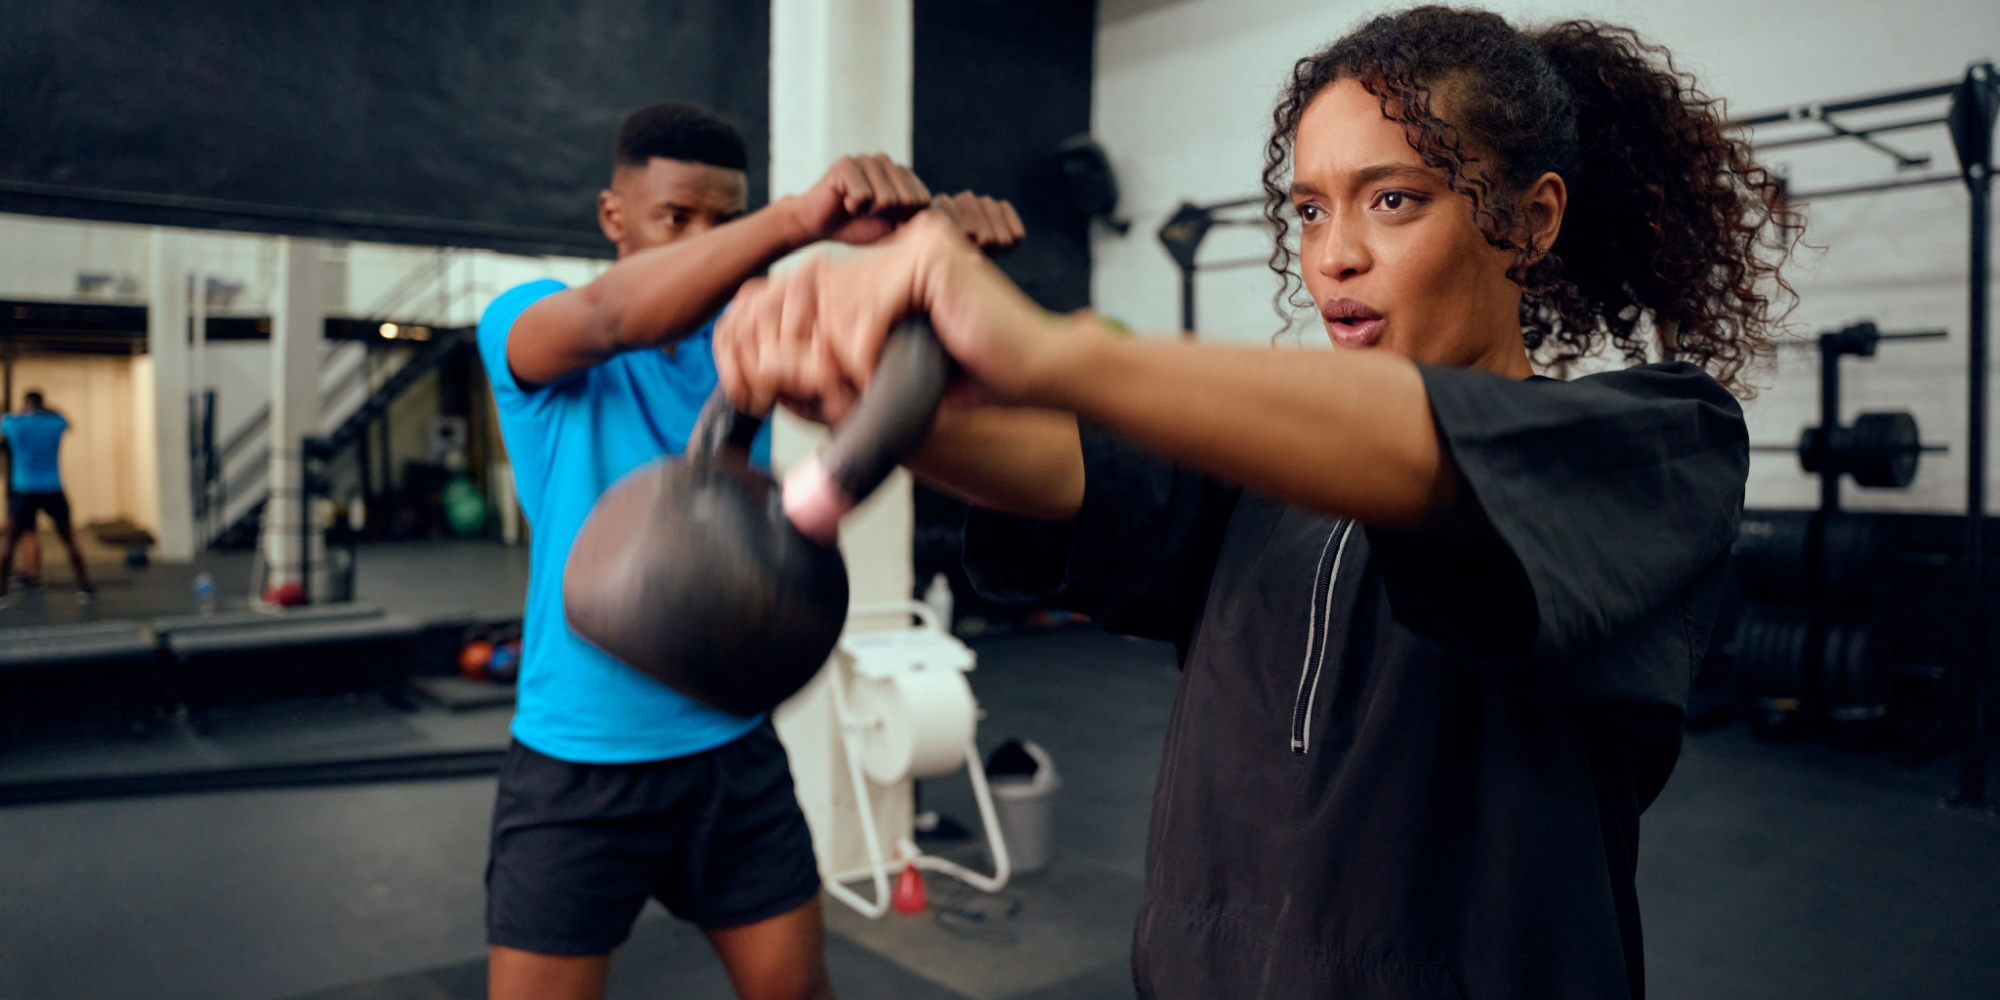 Is Personal Training the Best Career Choice for me?